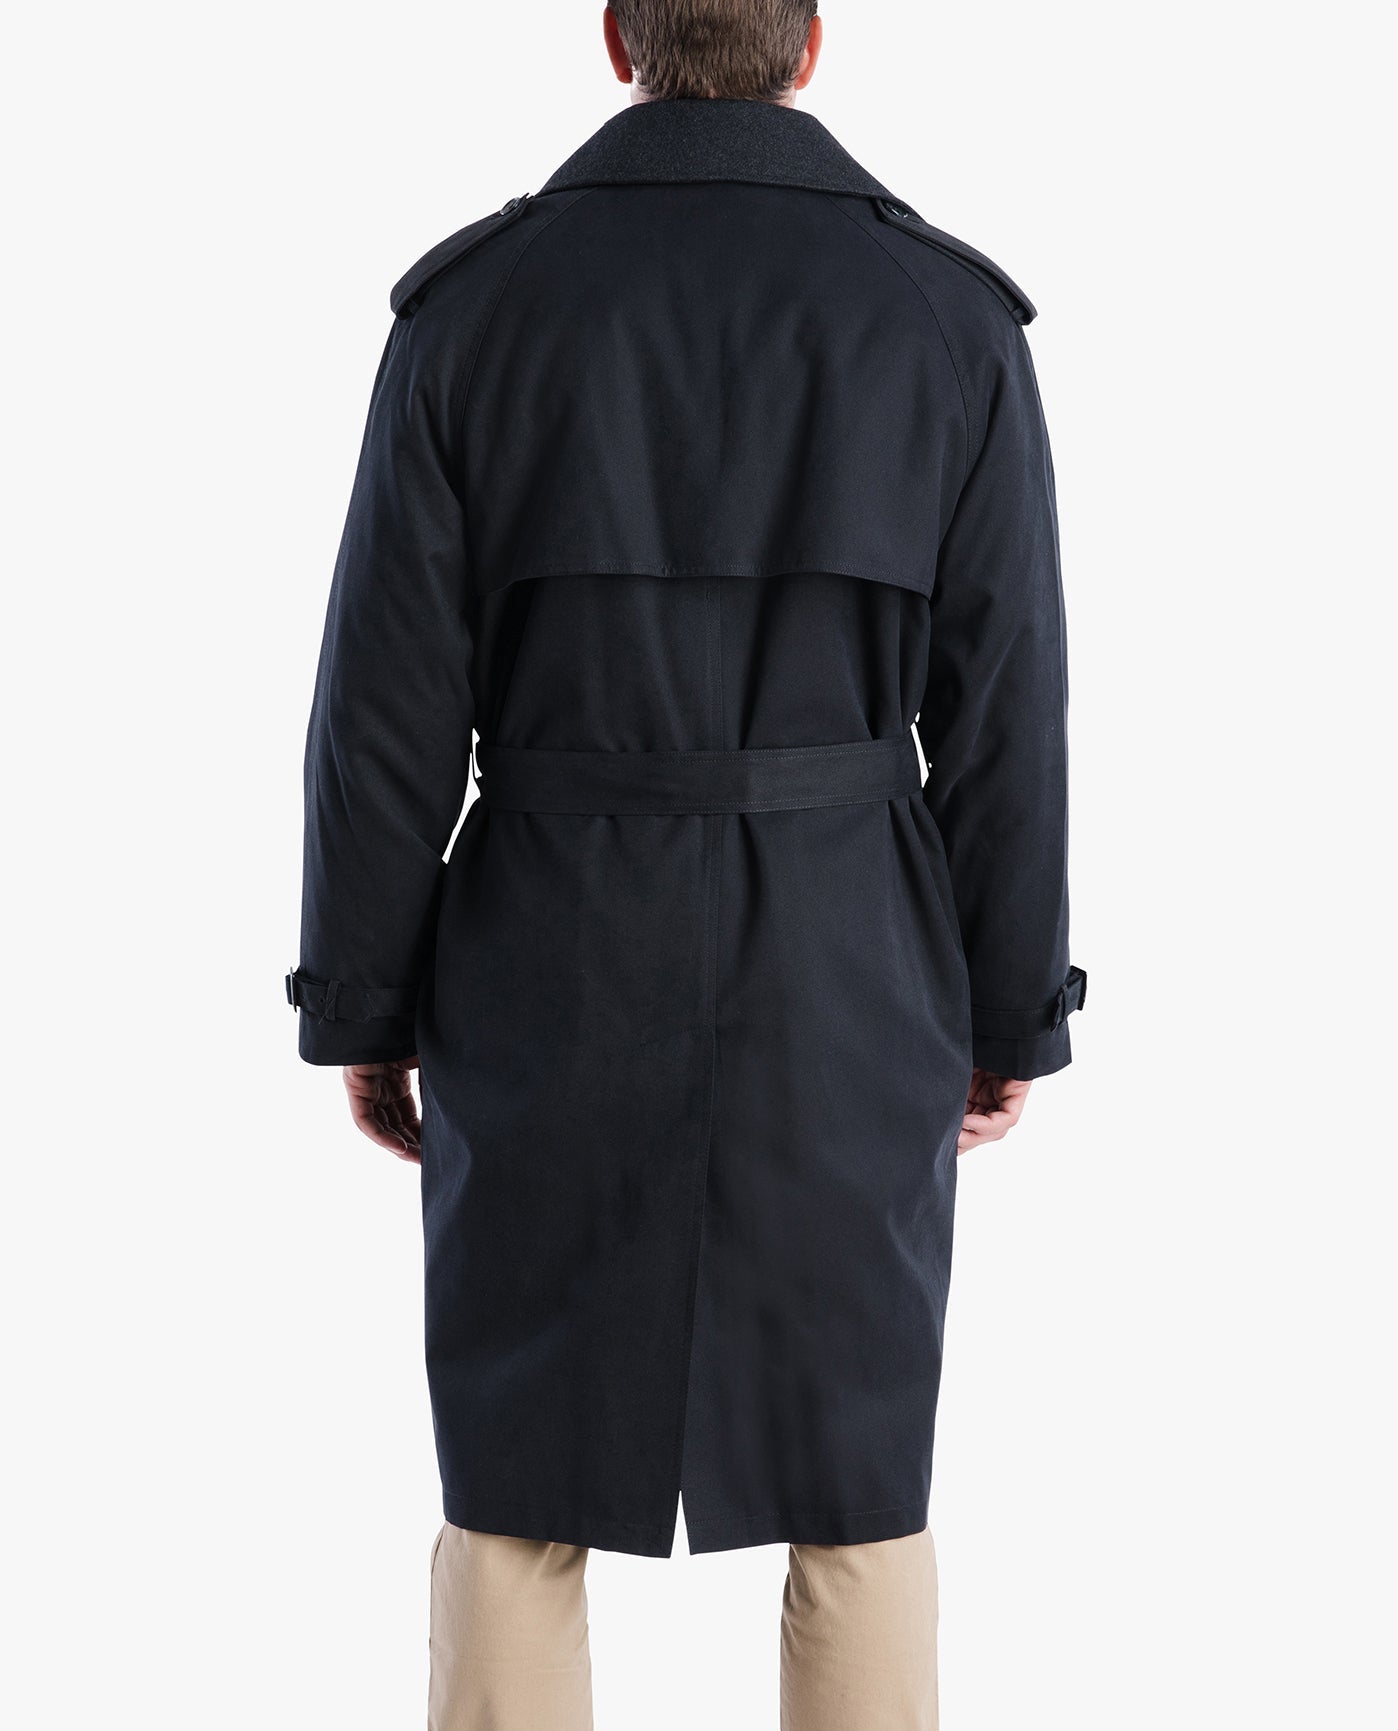 BACK VIEW OF CLASSIC DOUBLE BREASTED TRENCH COAT | BLACK